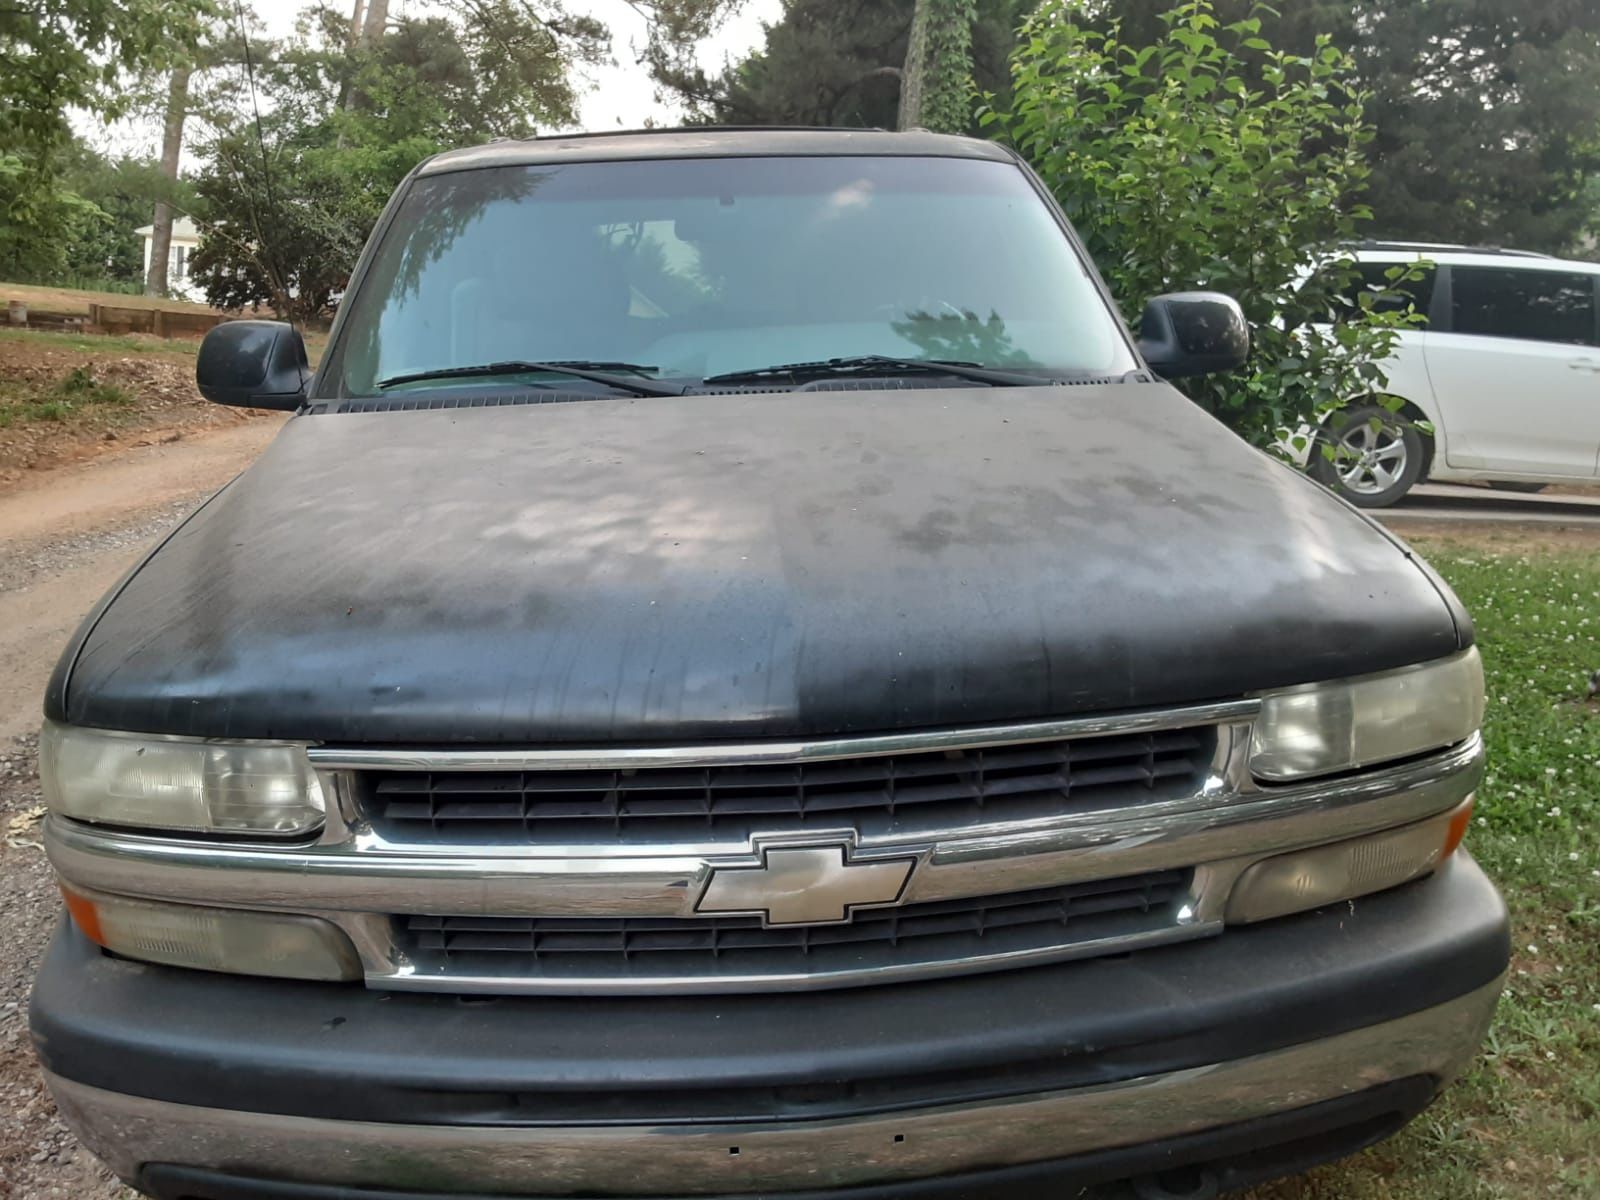 Photo I Have 2000 Tahoe For sale Runs good Need Transmission 220 Miles clean title